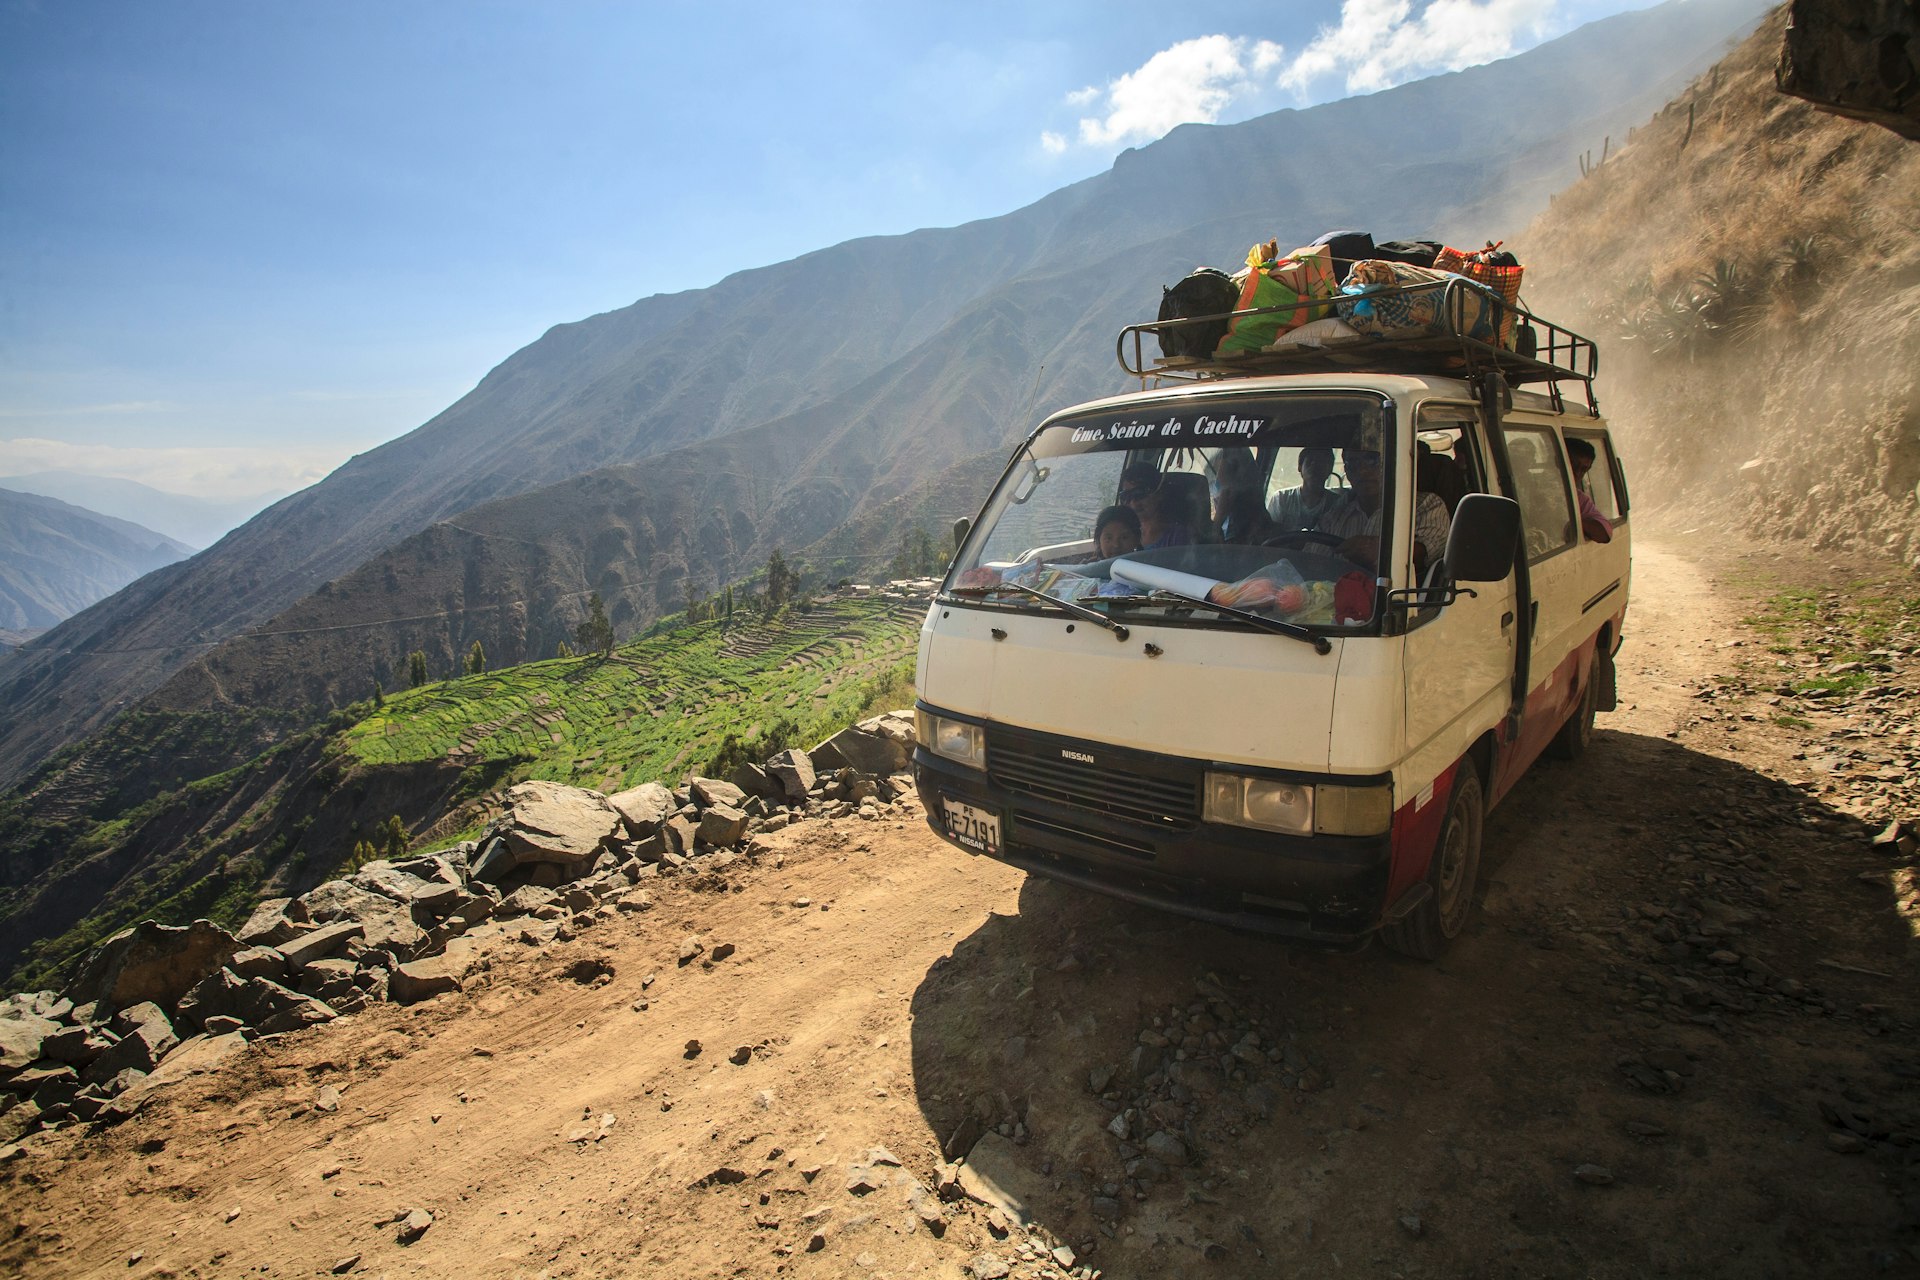 A small, old bus drives along a mountain dirt road in the Peruvian Andes mountain range. Next to the road is a steep drop leading down into a green valley.